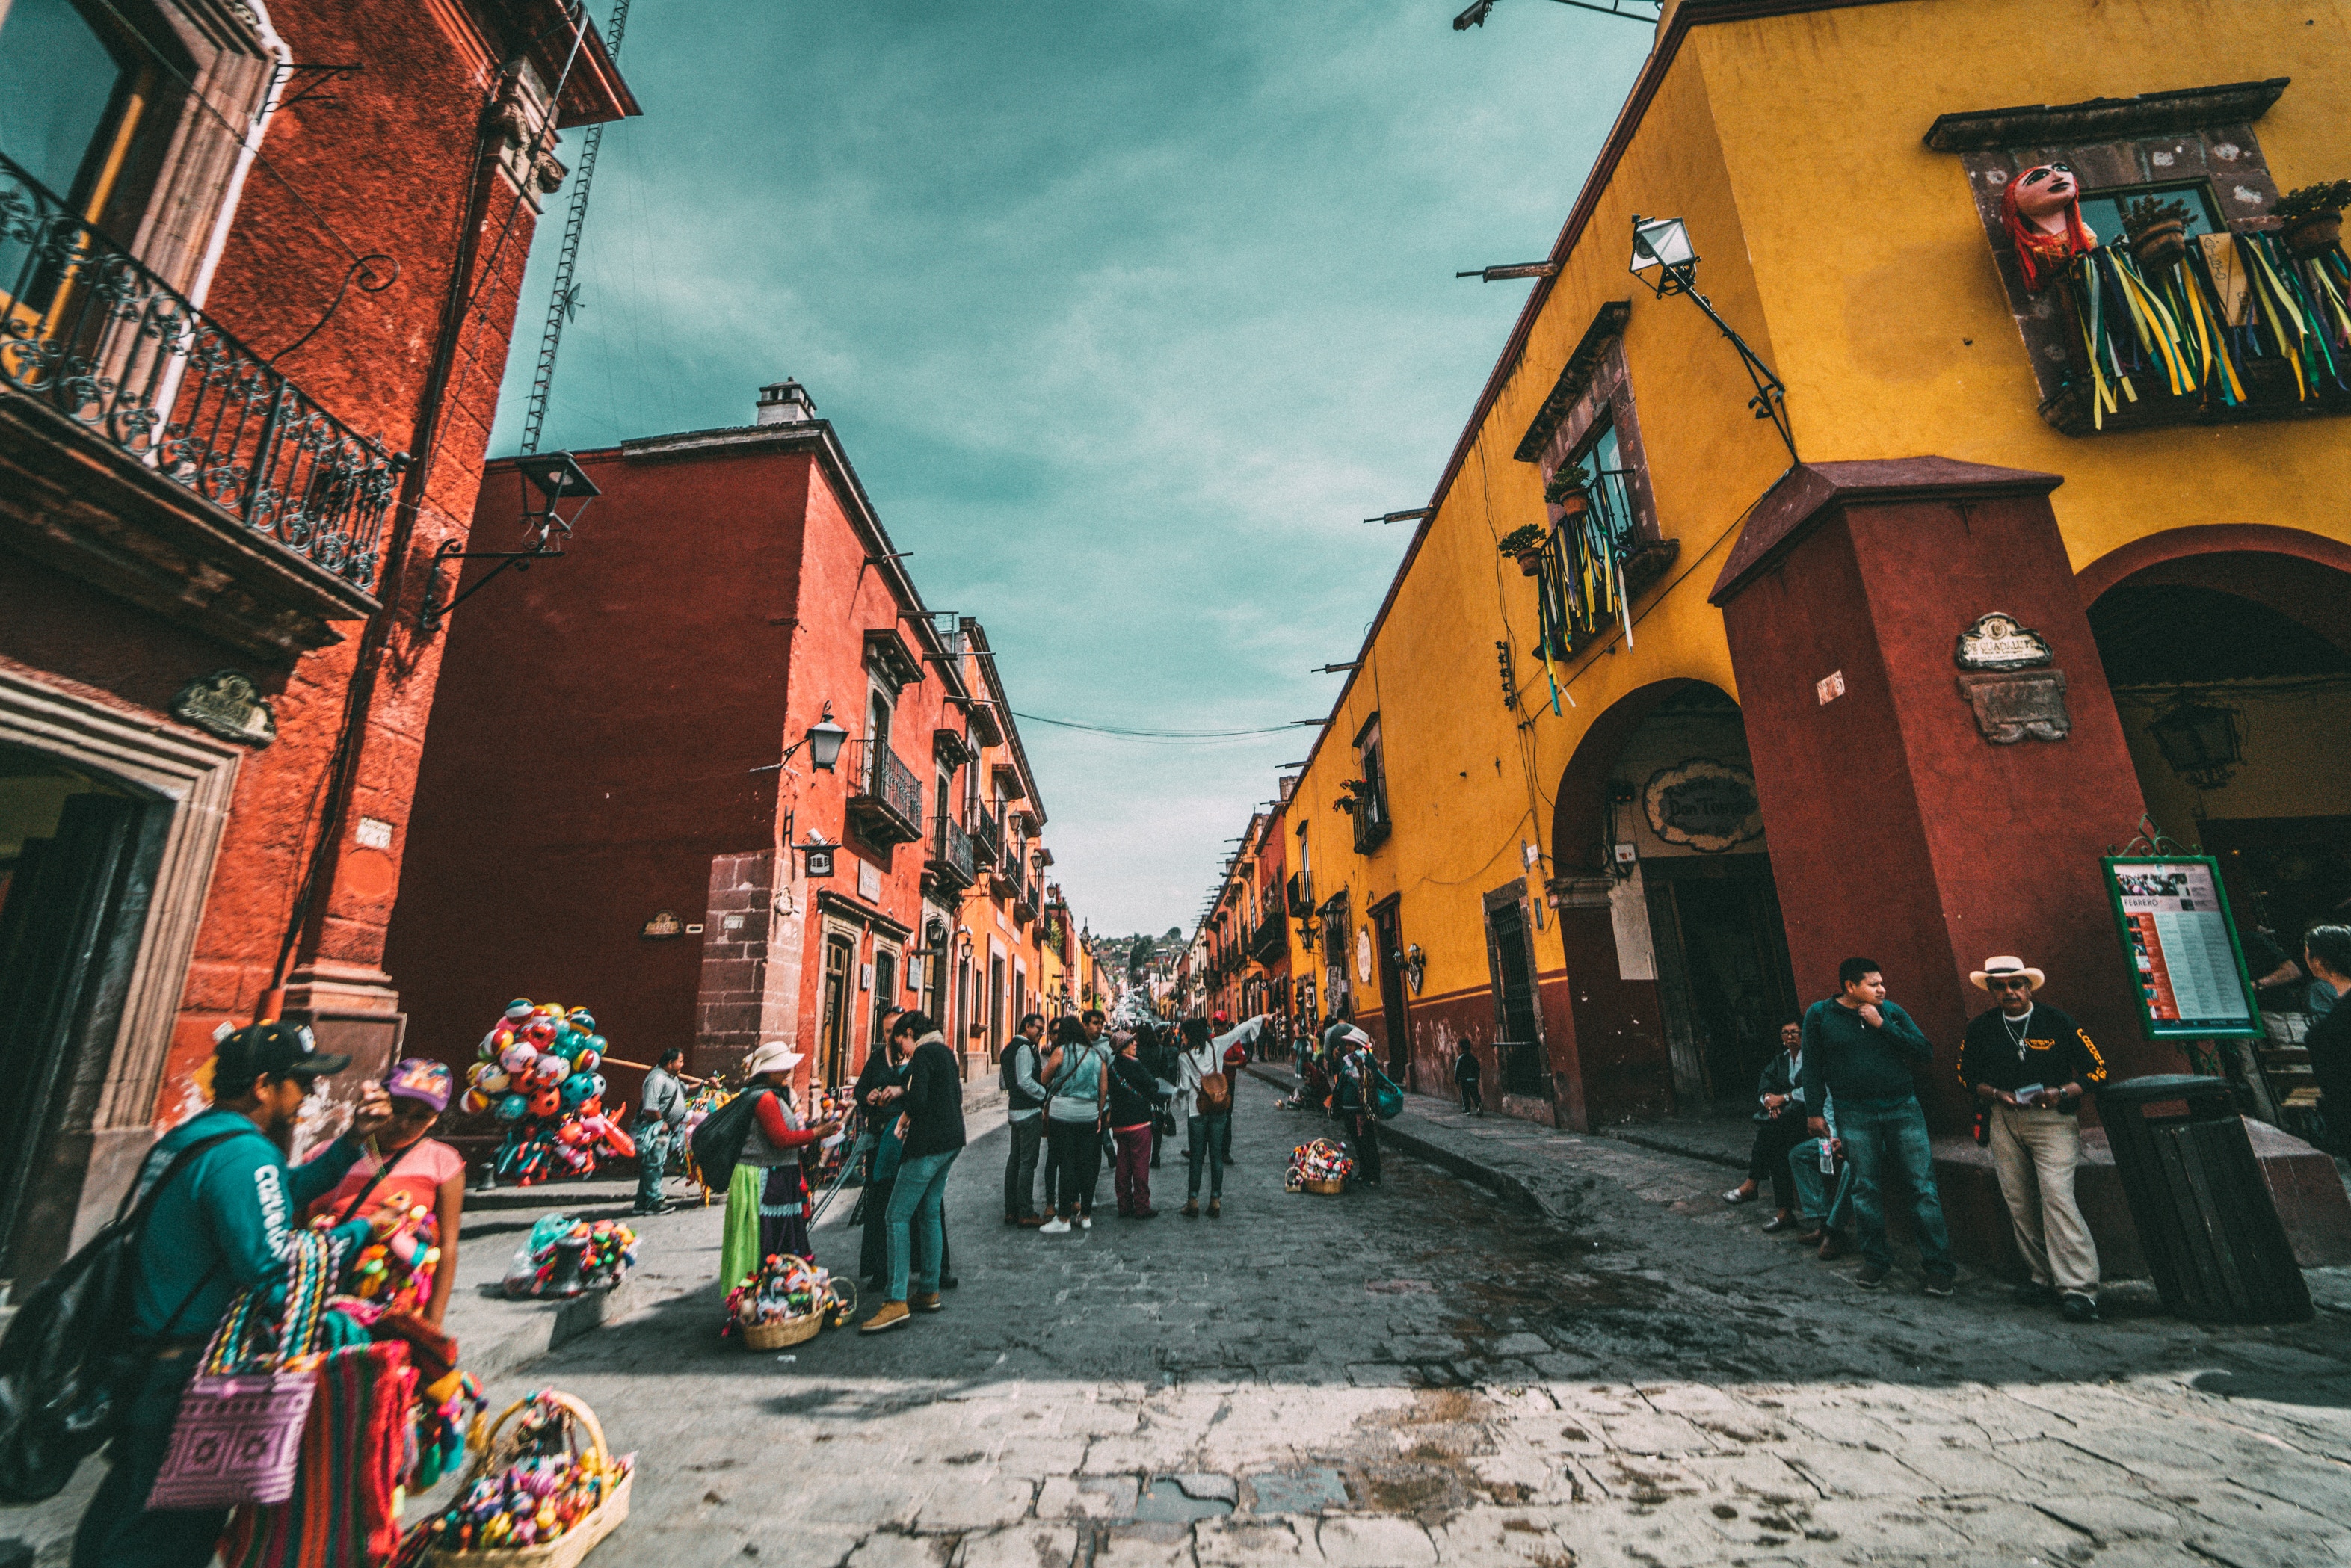 A photo of a street in Mexico